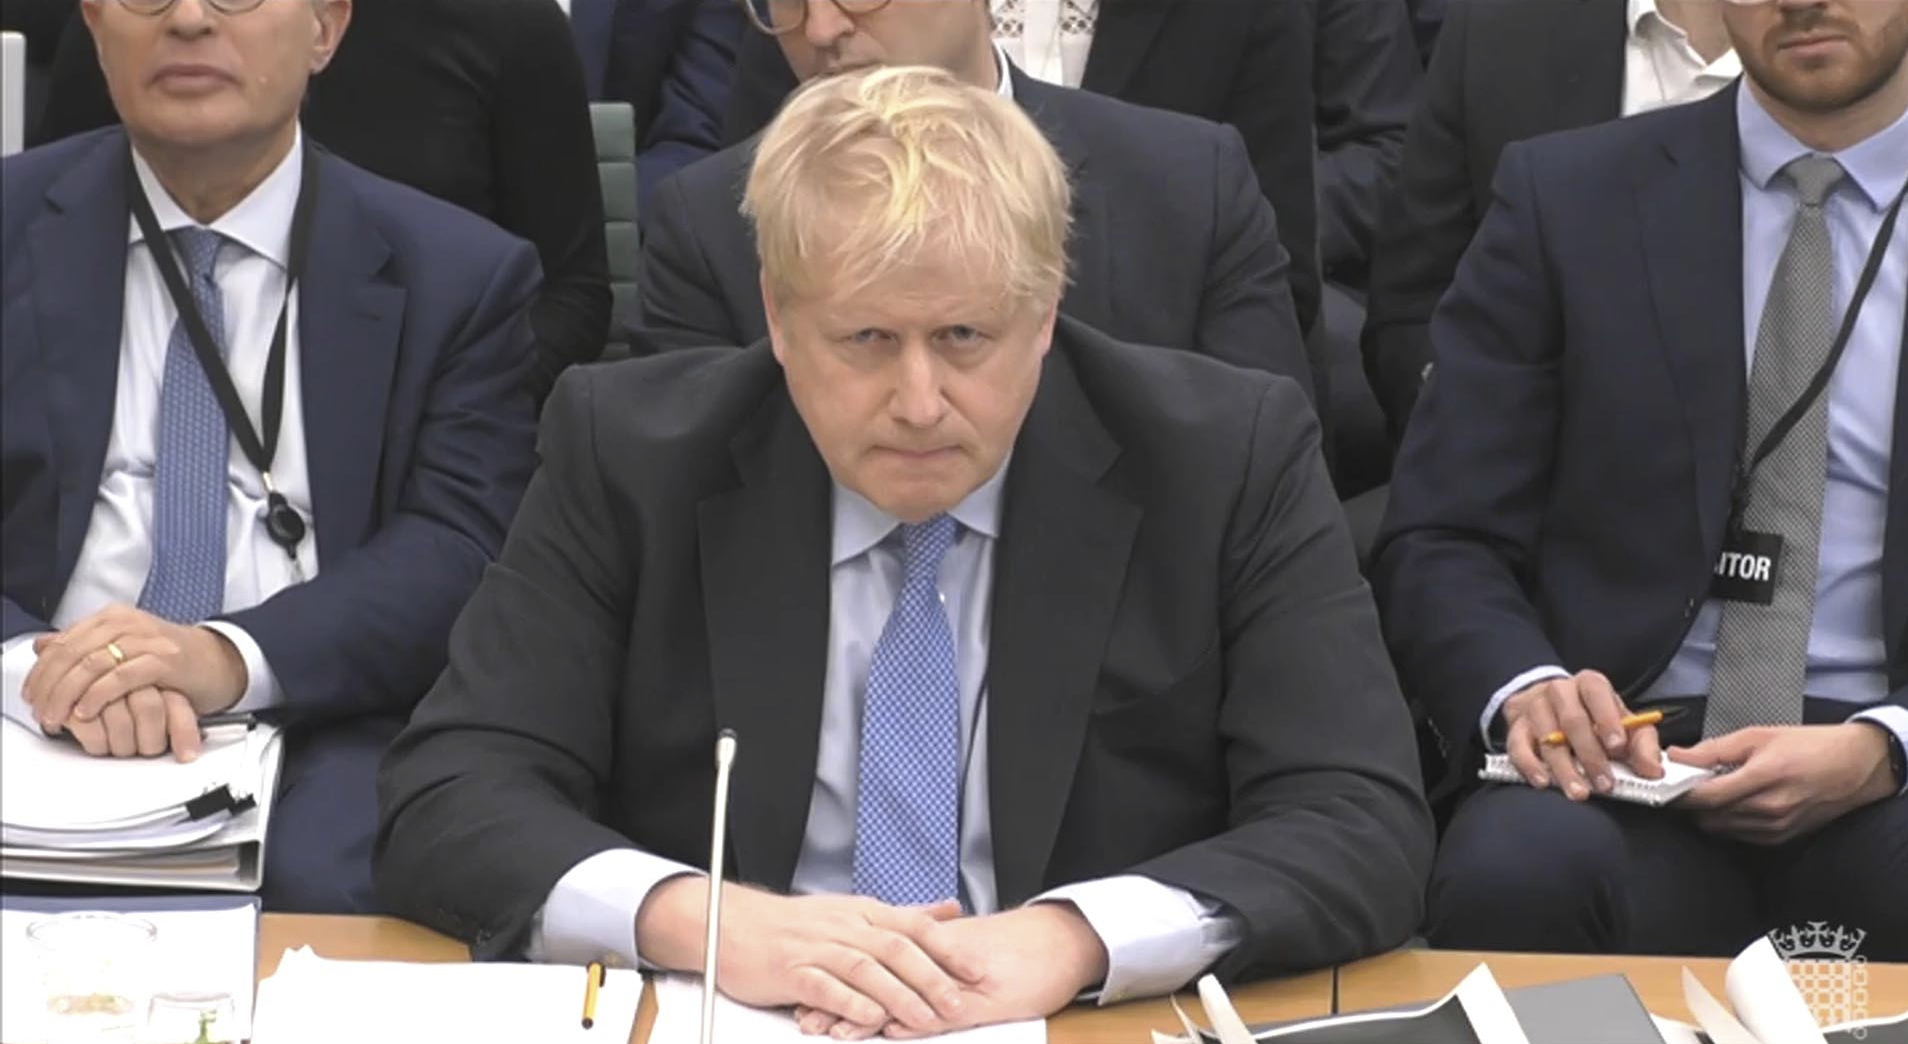 Johnson comes out swinging in crucial 'partygate' committee hearing